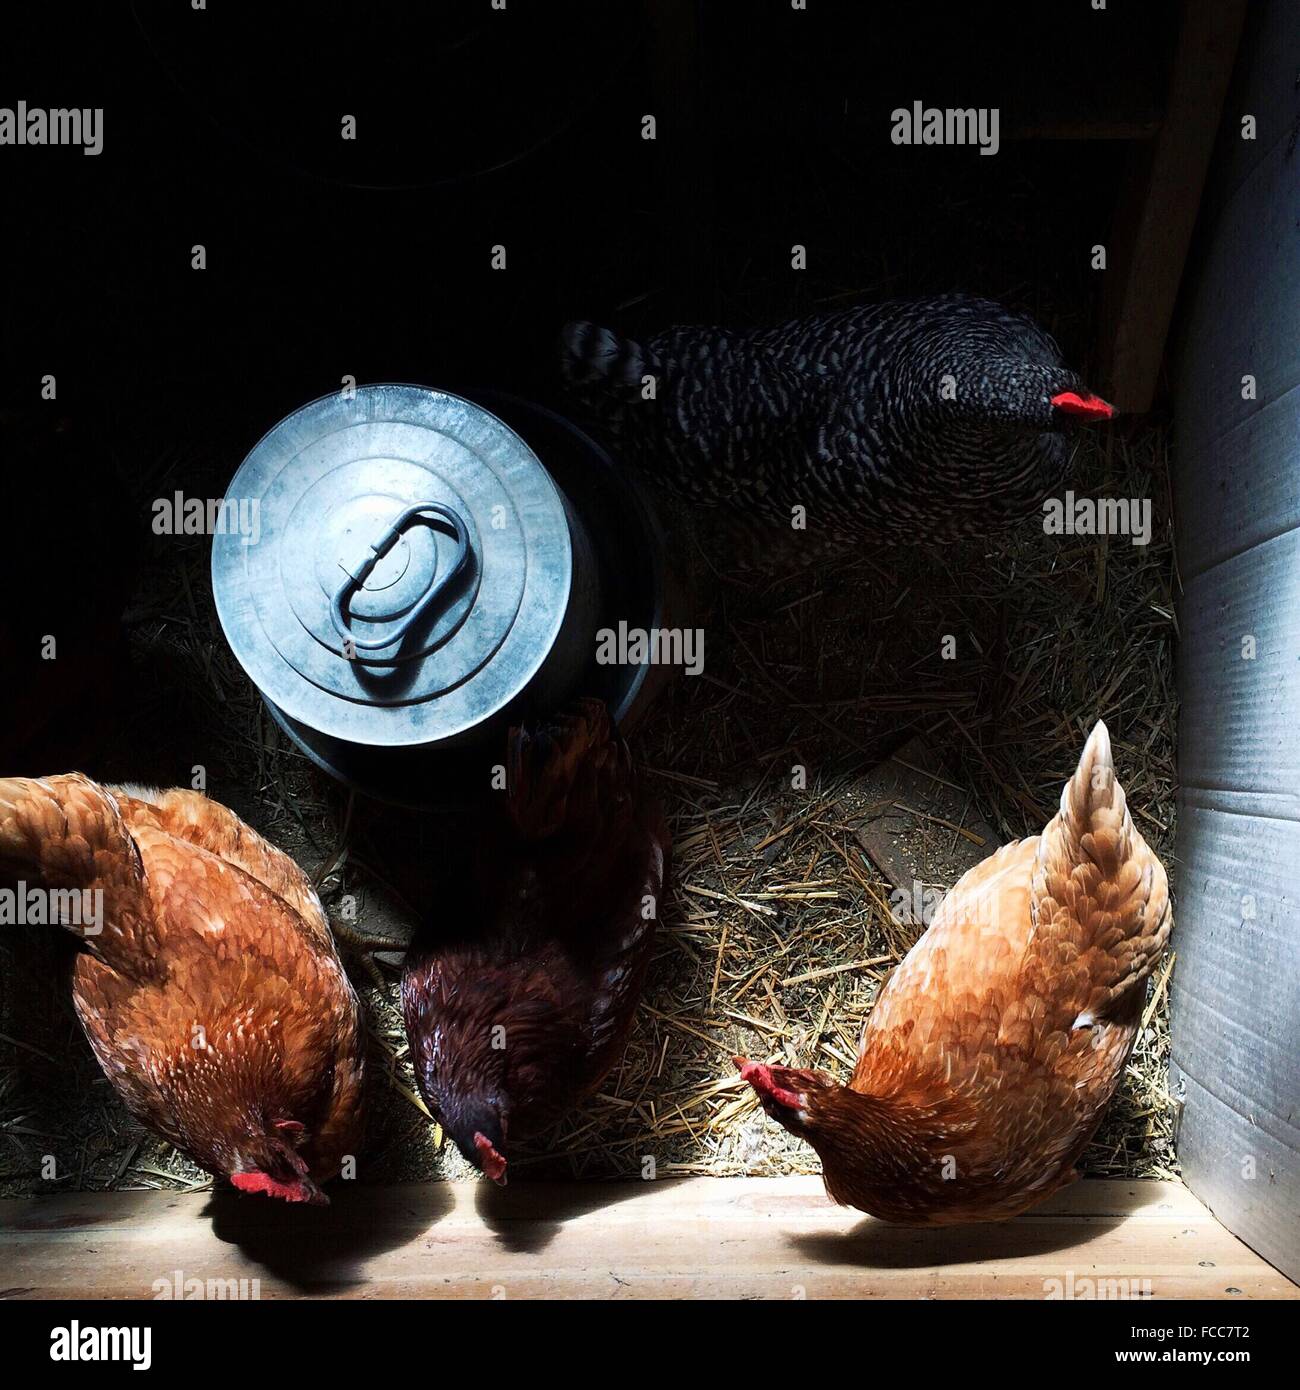 High Angle View Of Hens In Pen Stock Photo